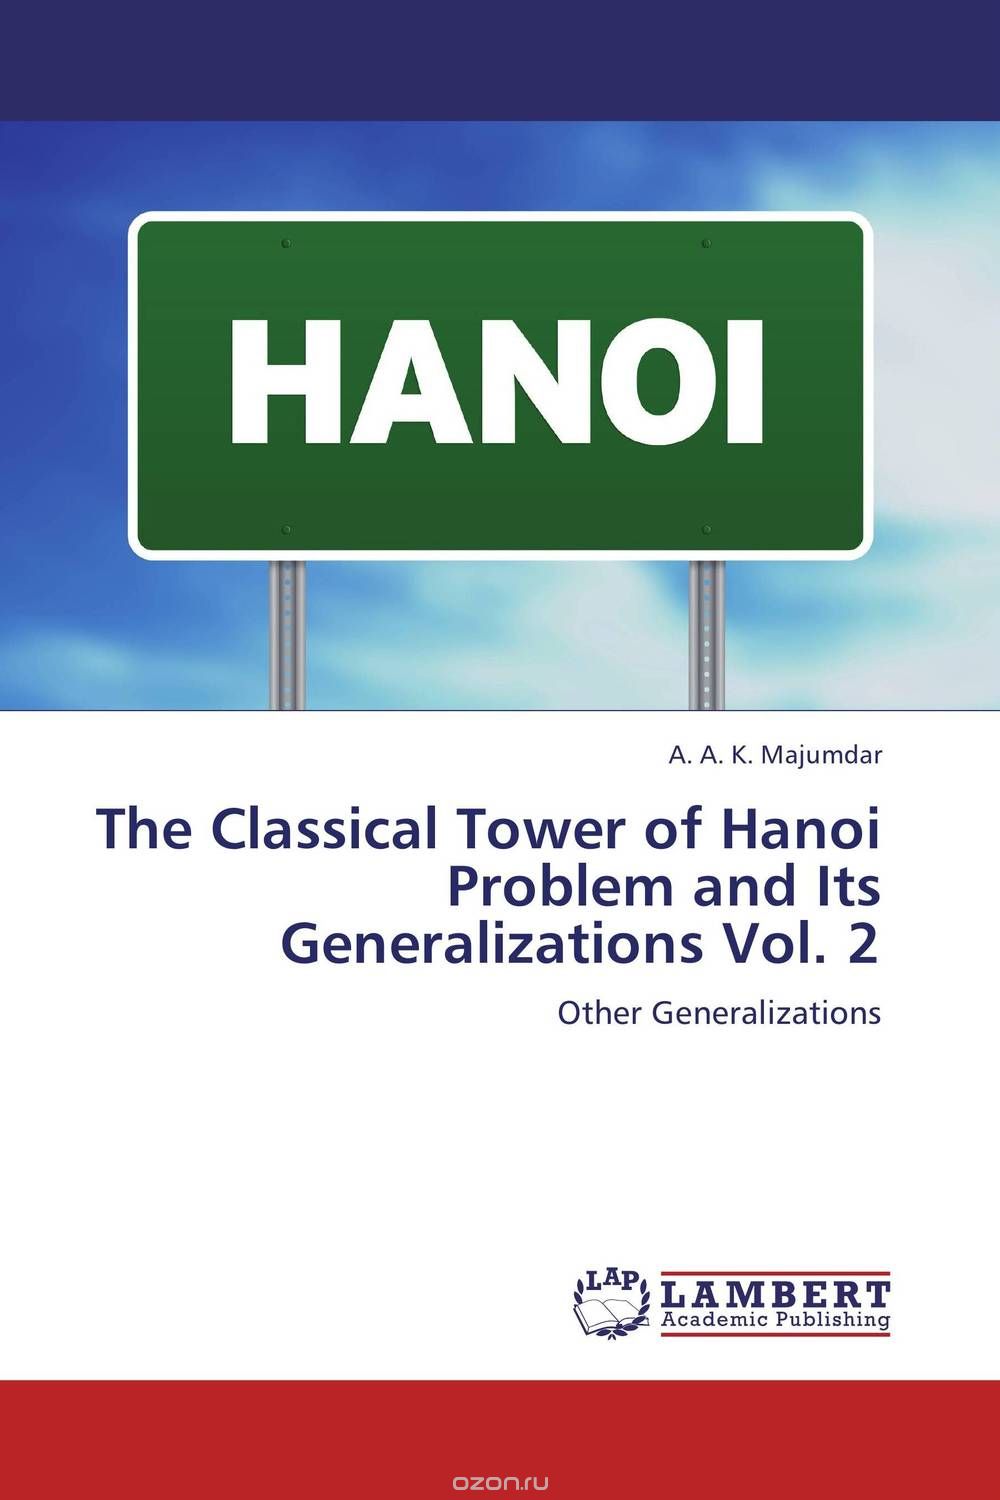 The Classical Tower of Hanoi Problem and Its Generalizations Vol. 2